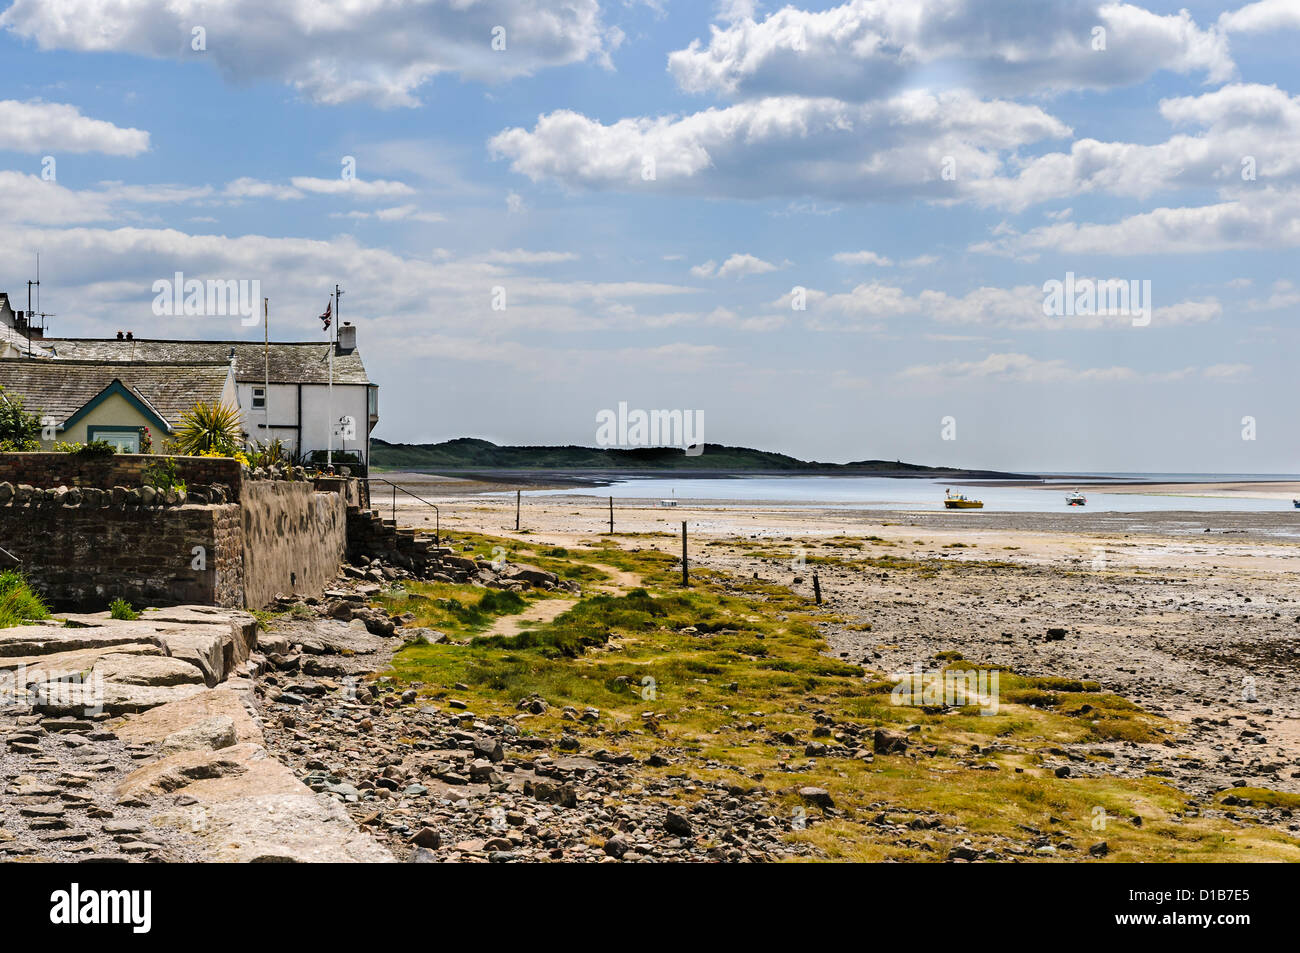 Stone steps lead from whitewashed houses to a stone covered beach and the blue sea in the distance, Ravenglass Stock Photo